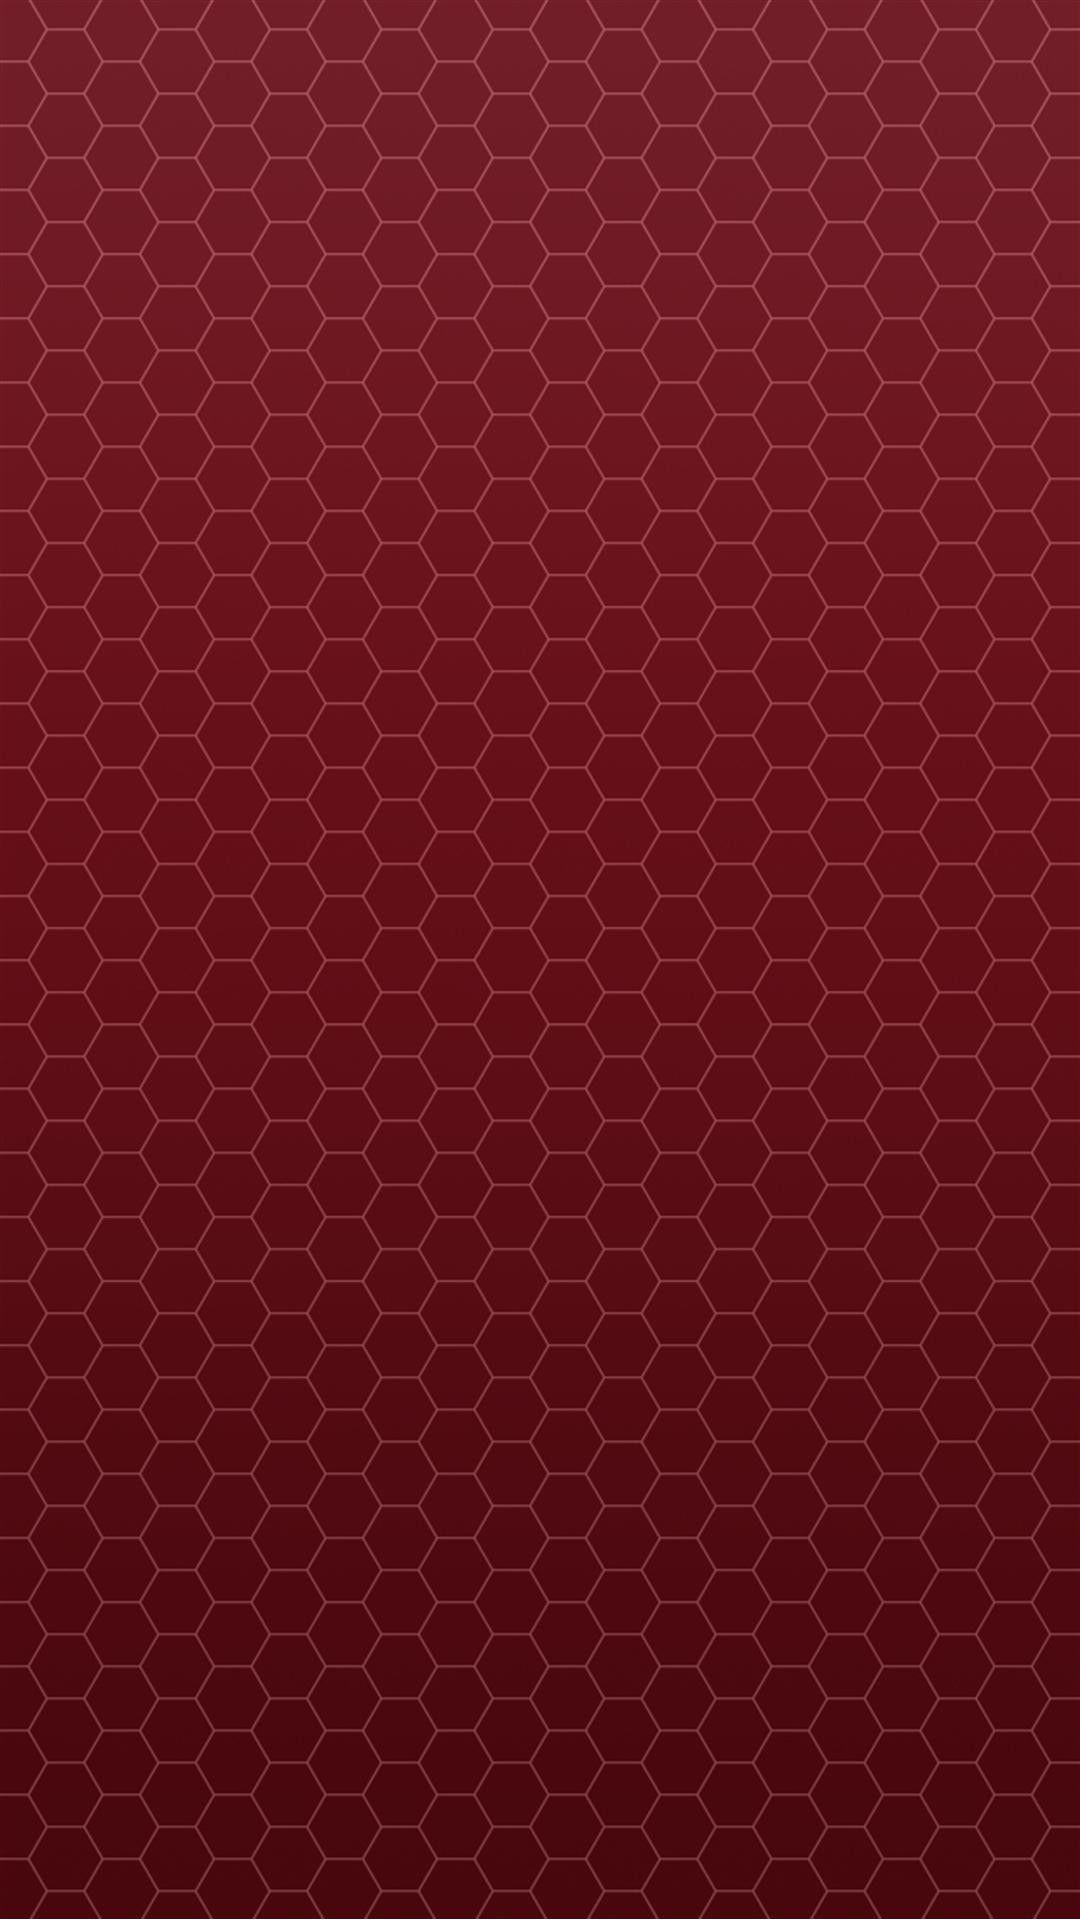 Honeycomb Red Pattern Android Wallpaper free download